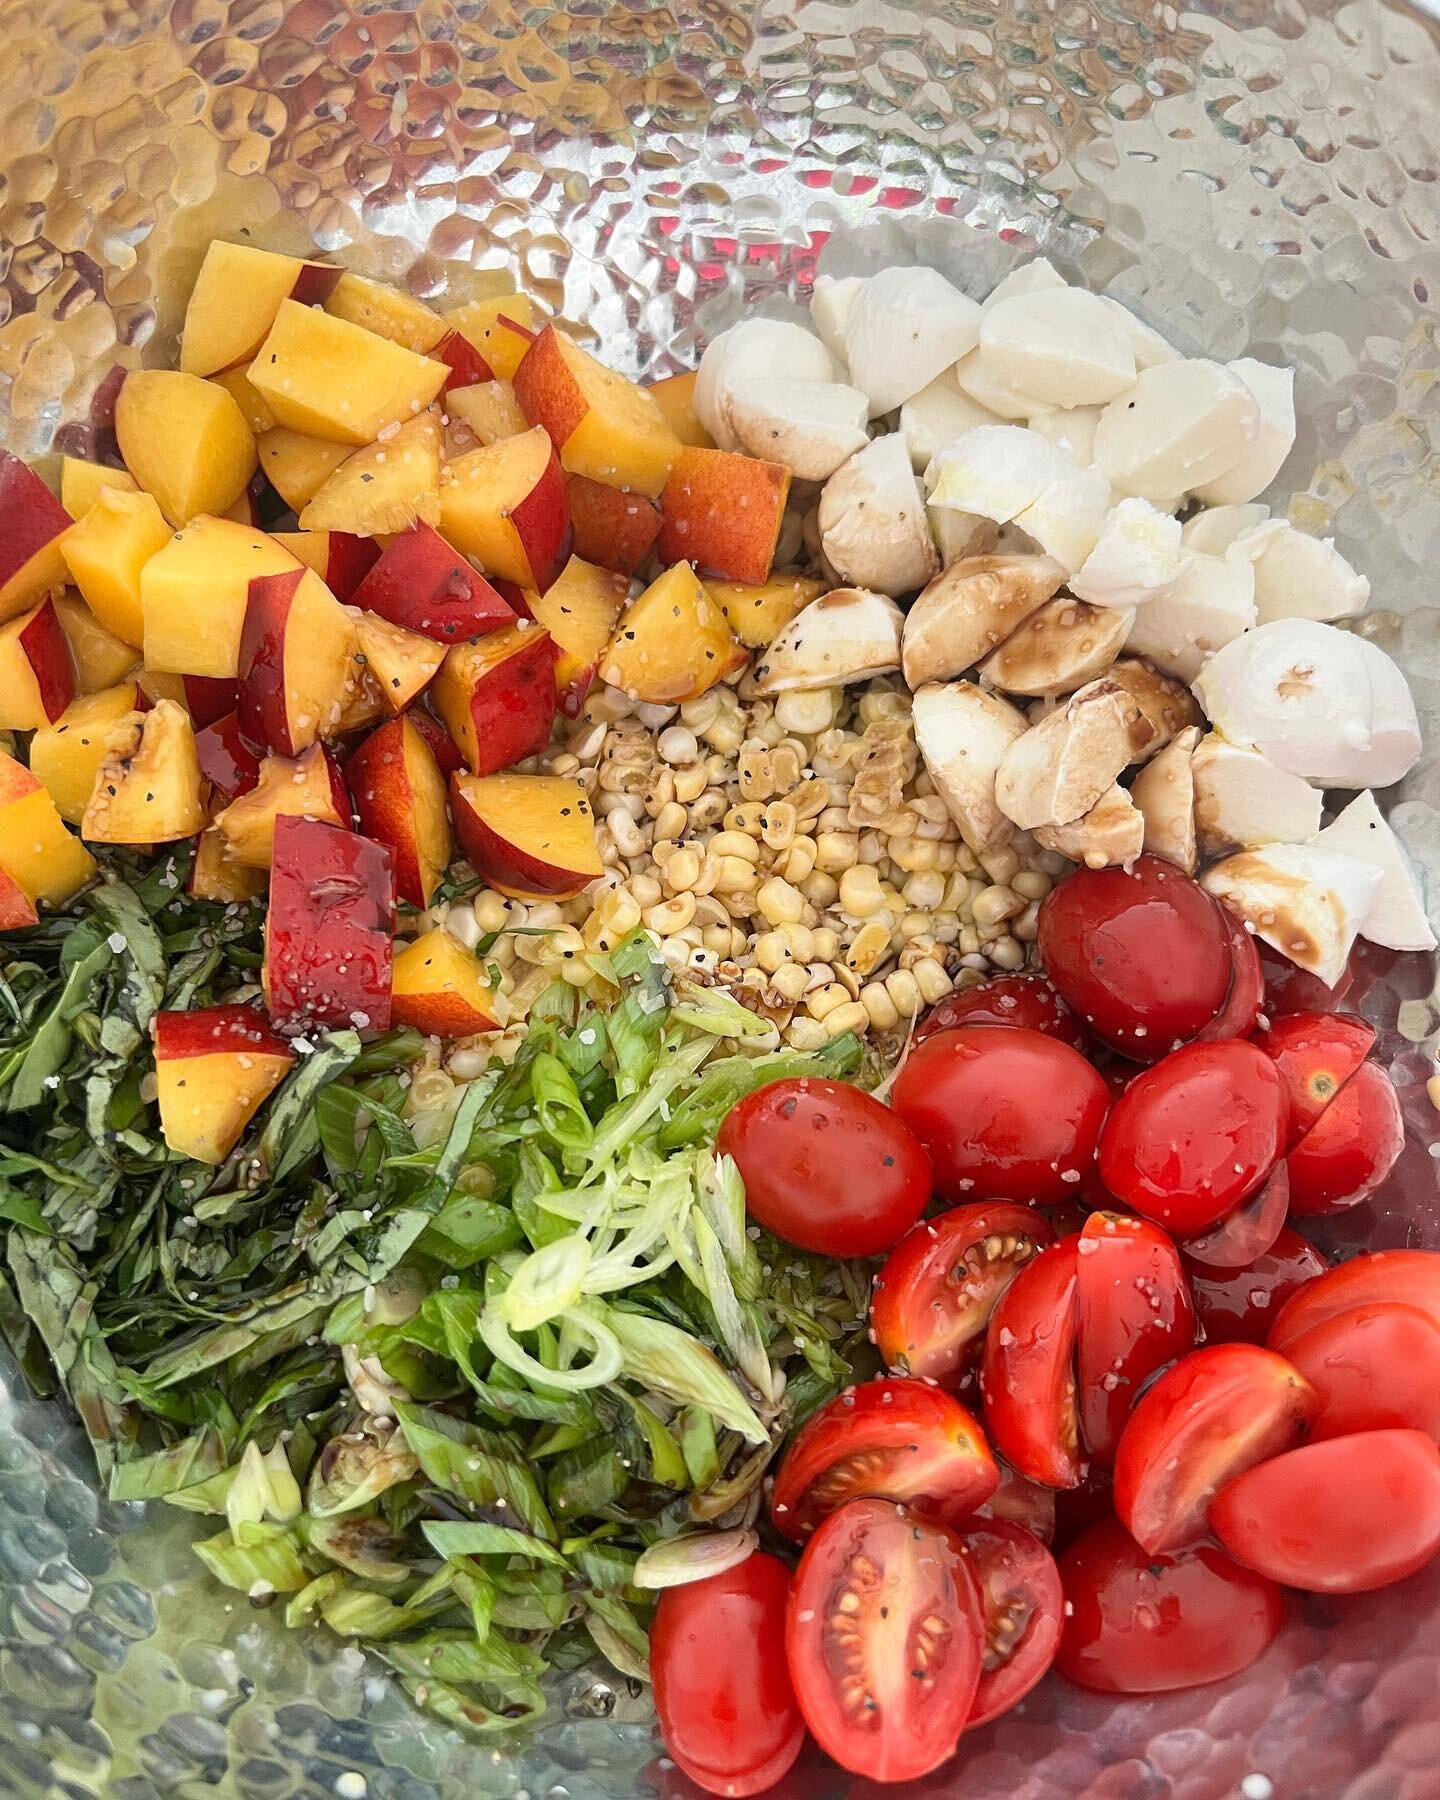 A Month of Cooking- Hamptons Edition: corn salad, Greek chicken with orzo, raspberry rhubarb galette, peach caprese salad, sprouted broccoli w/ shallots, chicken with white wine, pesto, &amp; peaches, Sungold tomato sauce w/ fresh mozzarella, FBBE pe